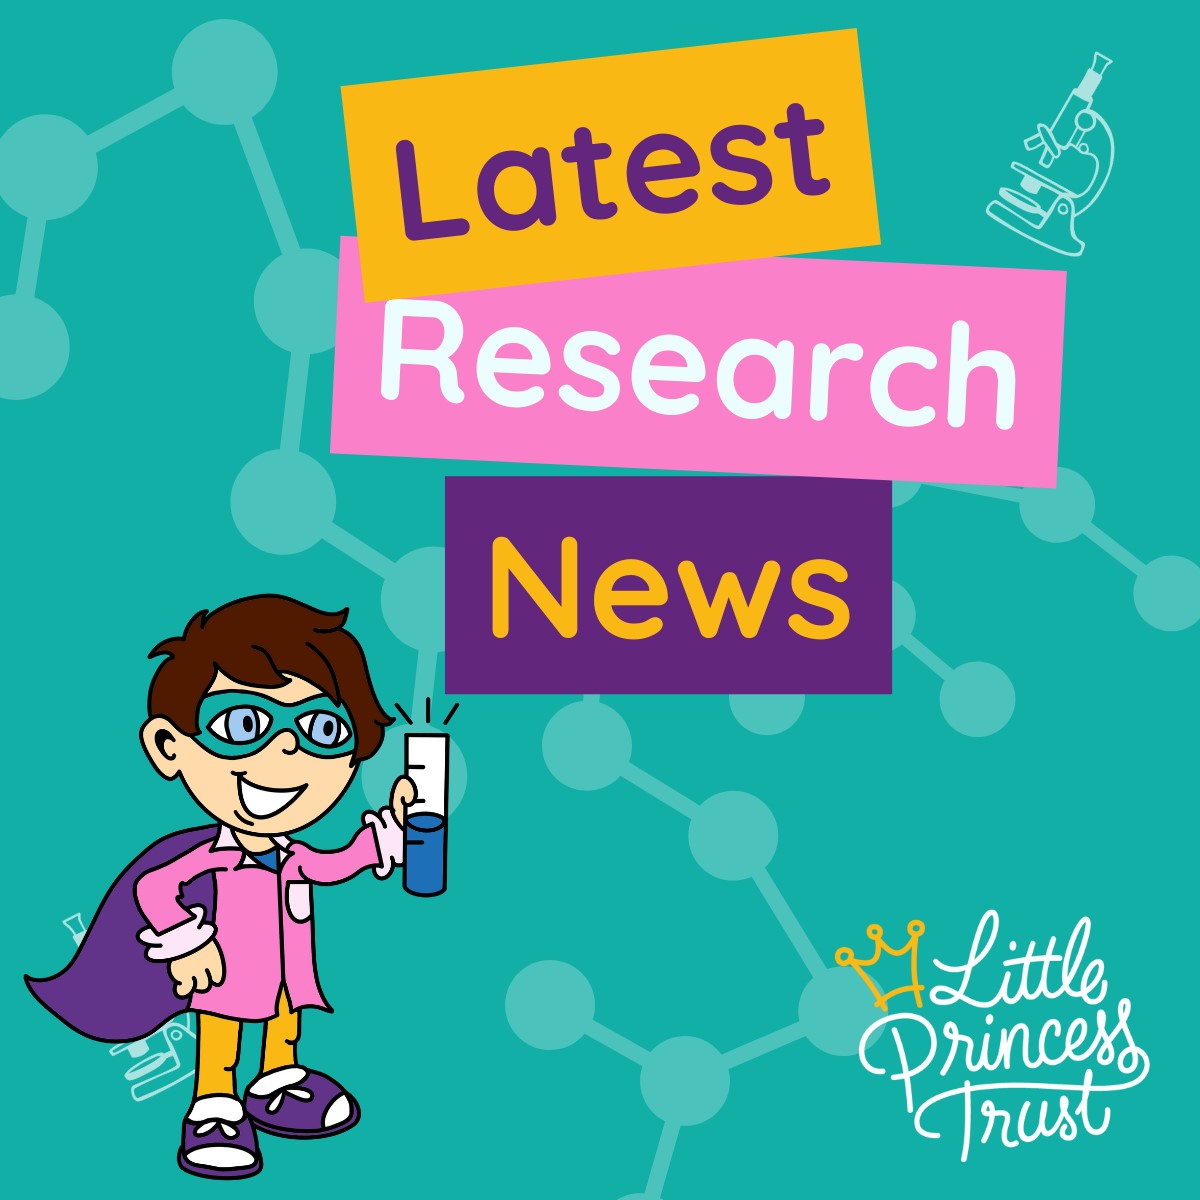 Three cutting-edge projects funded into childhood neuroblastoma